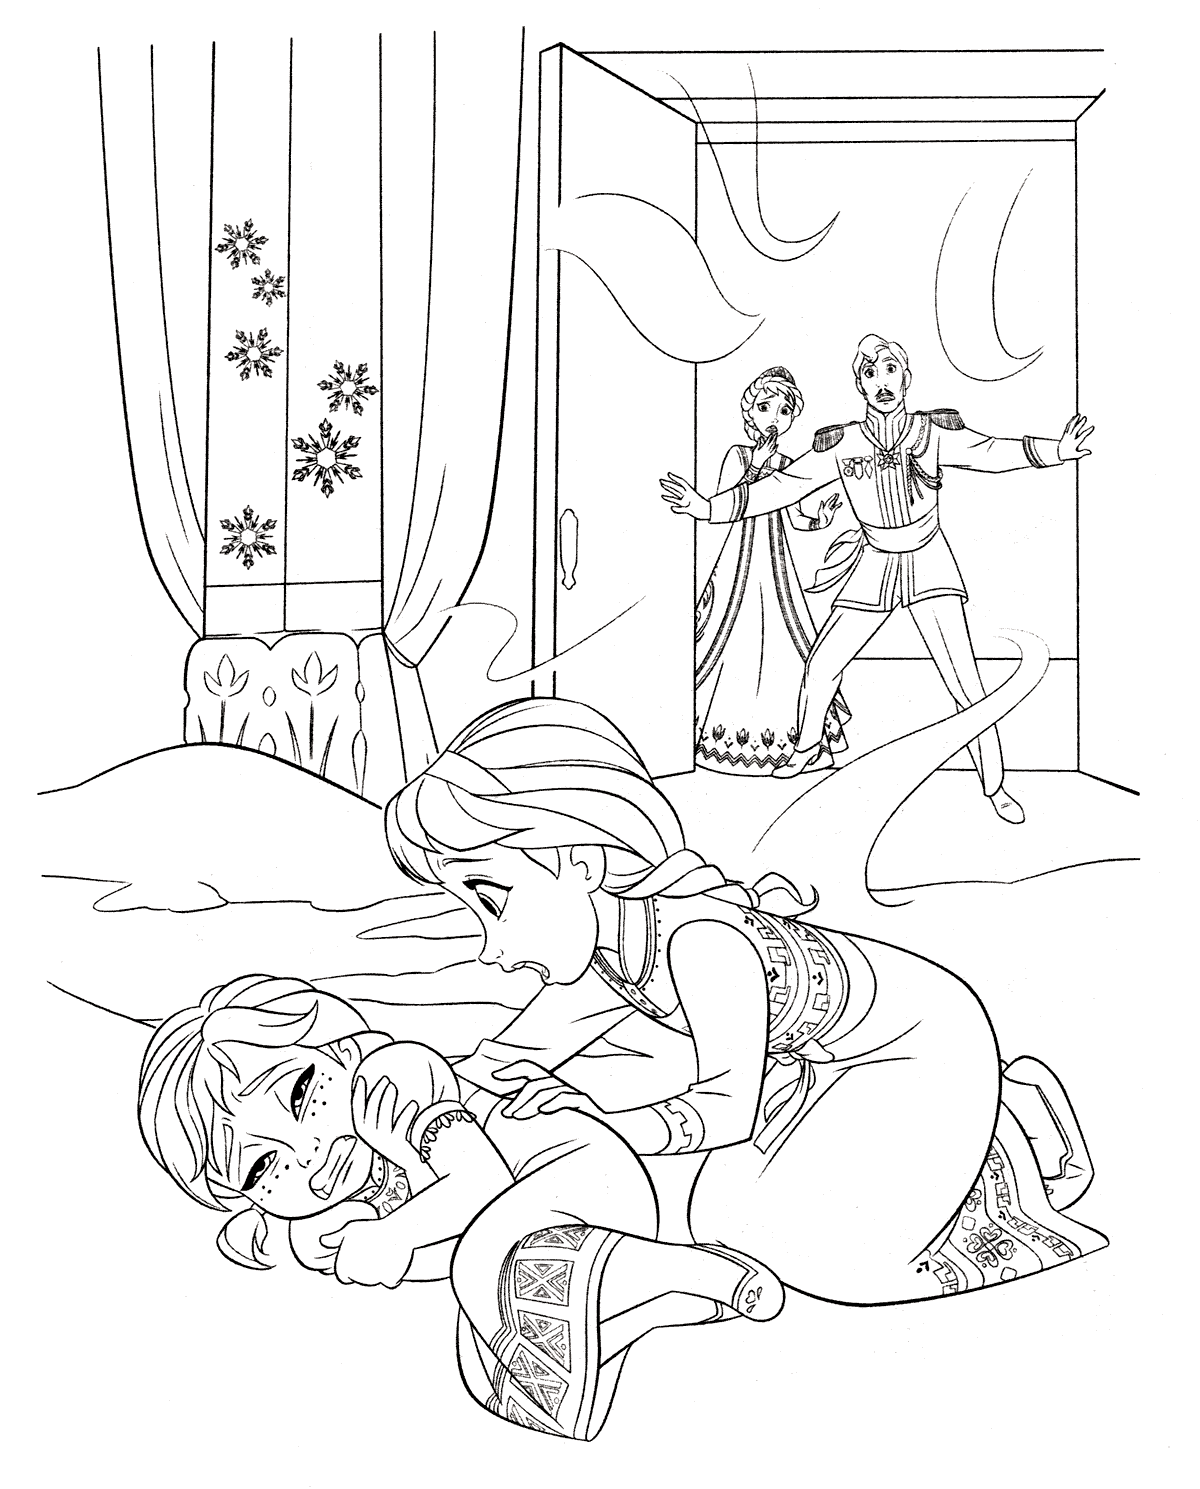 Download Coloring page - Elsa helps Anna